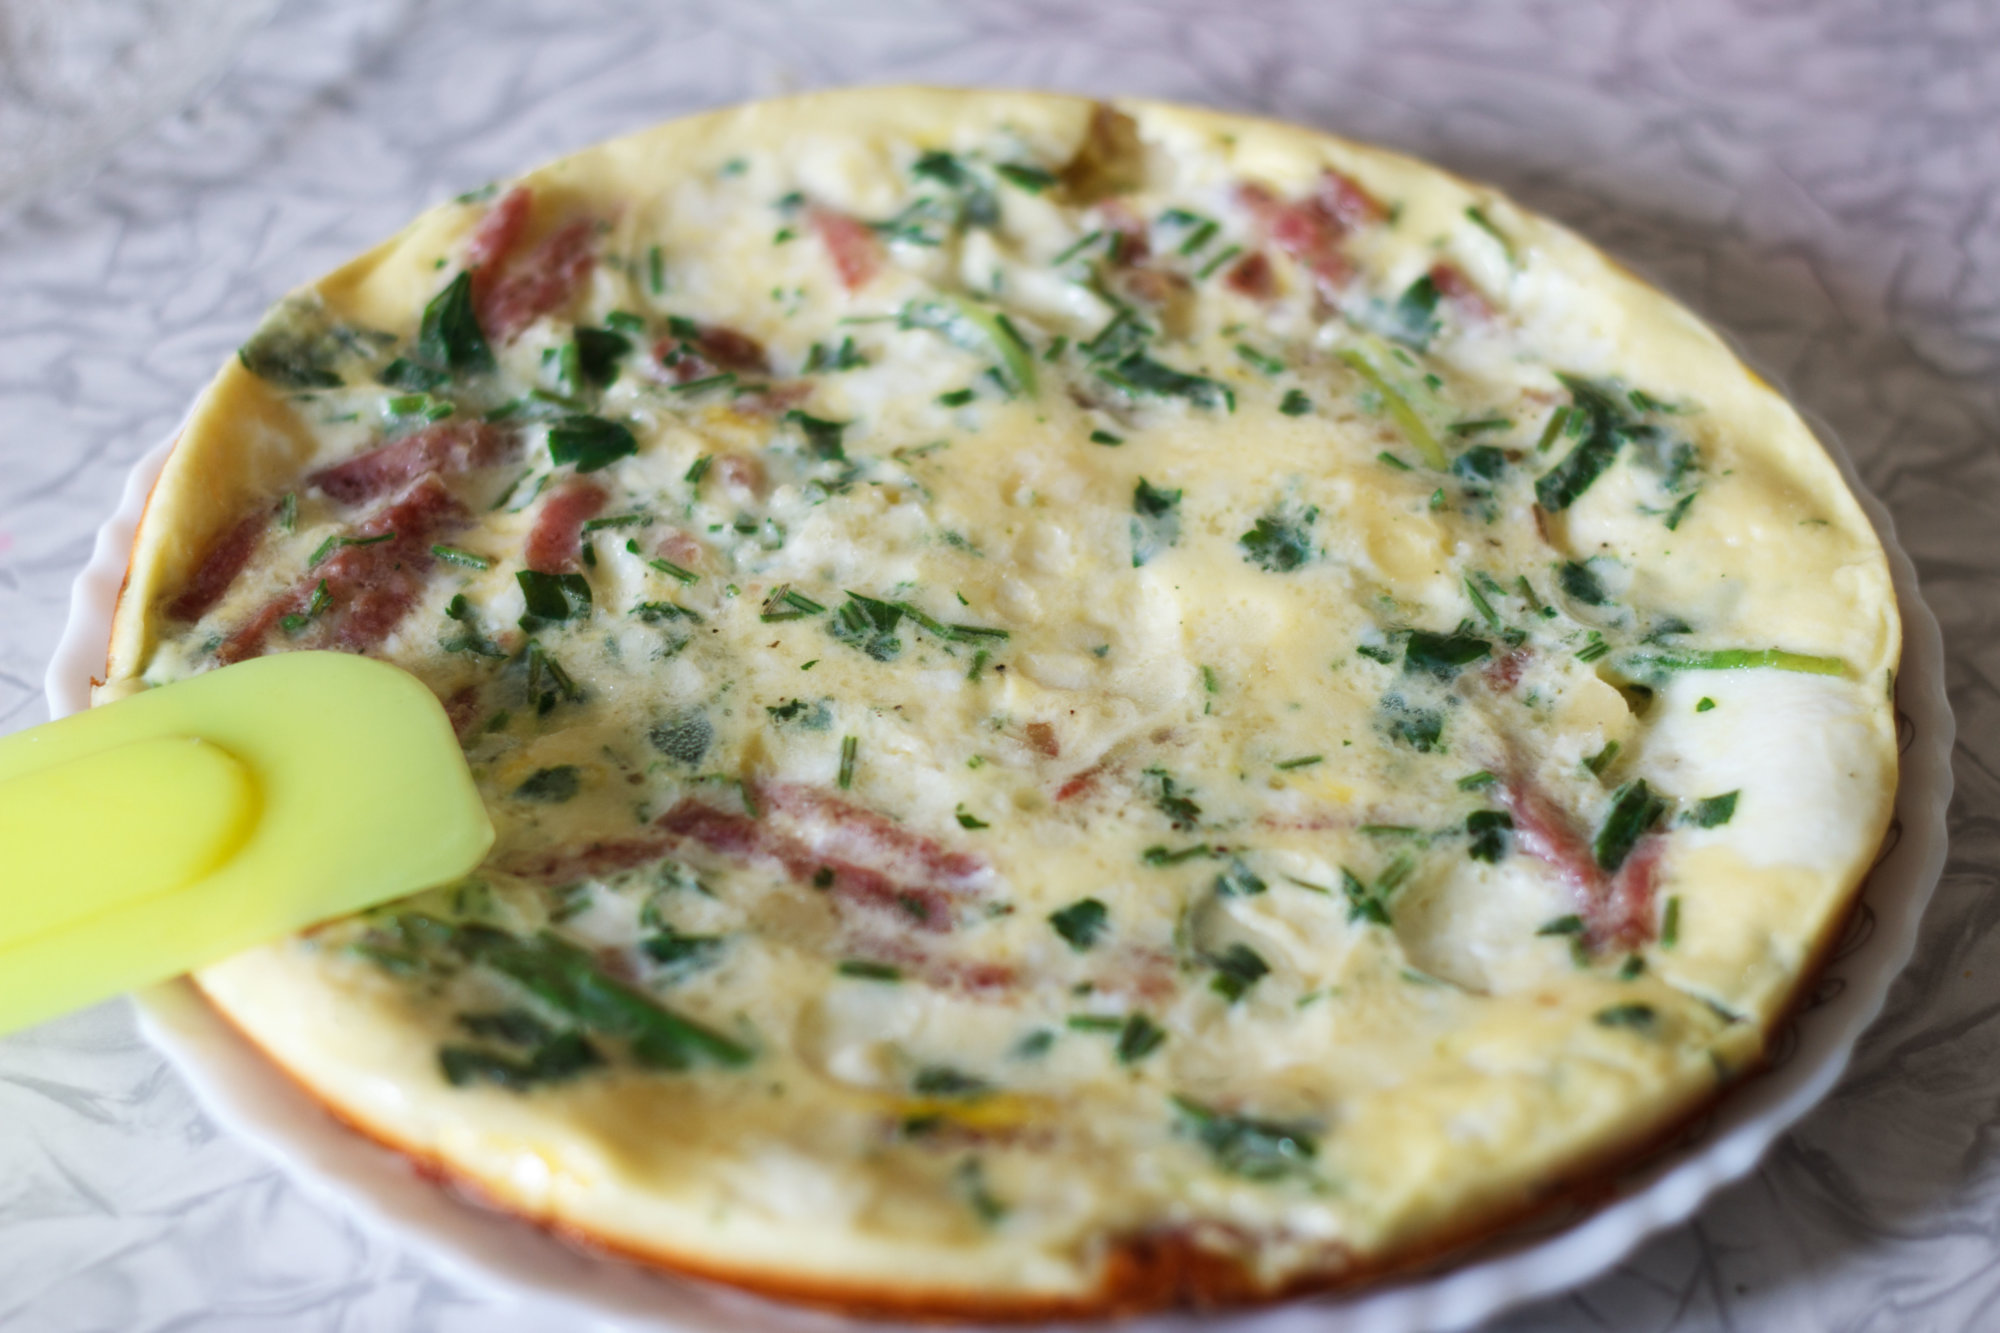 magnificent hot omelet with greens and sausage for breakfast